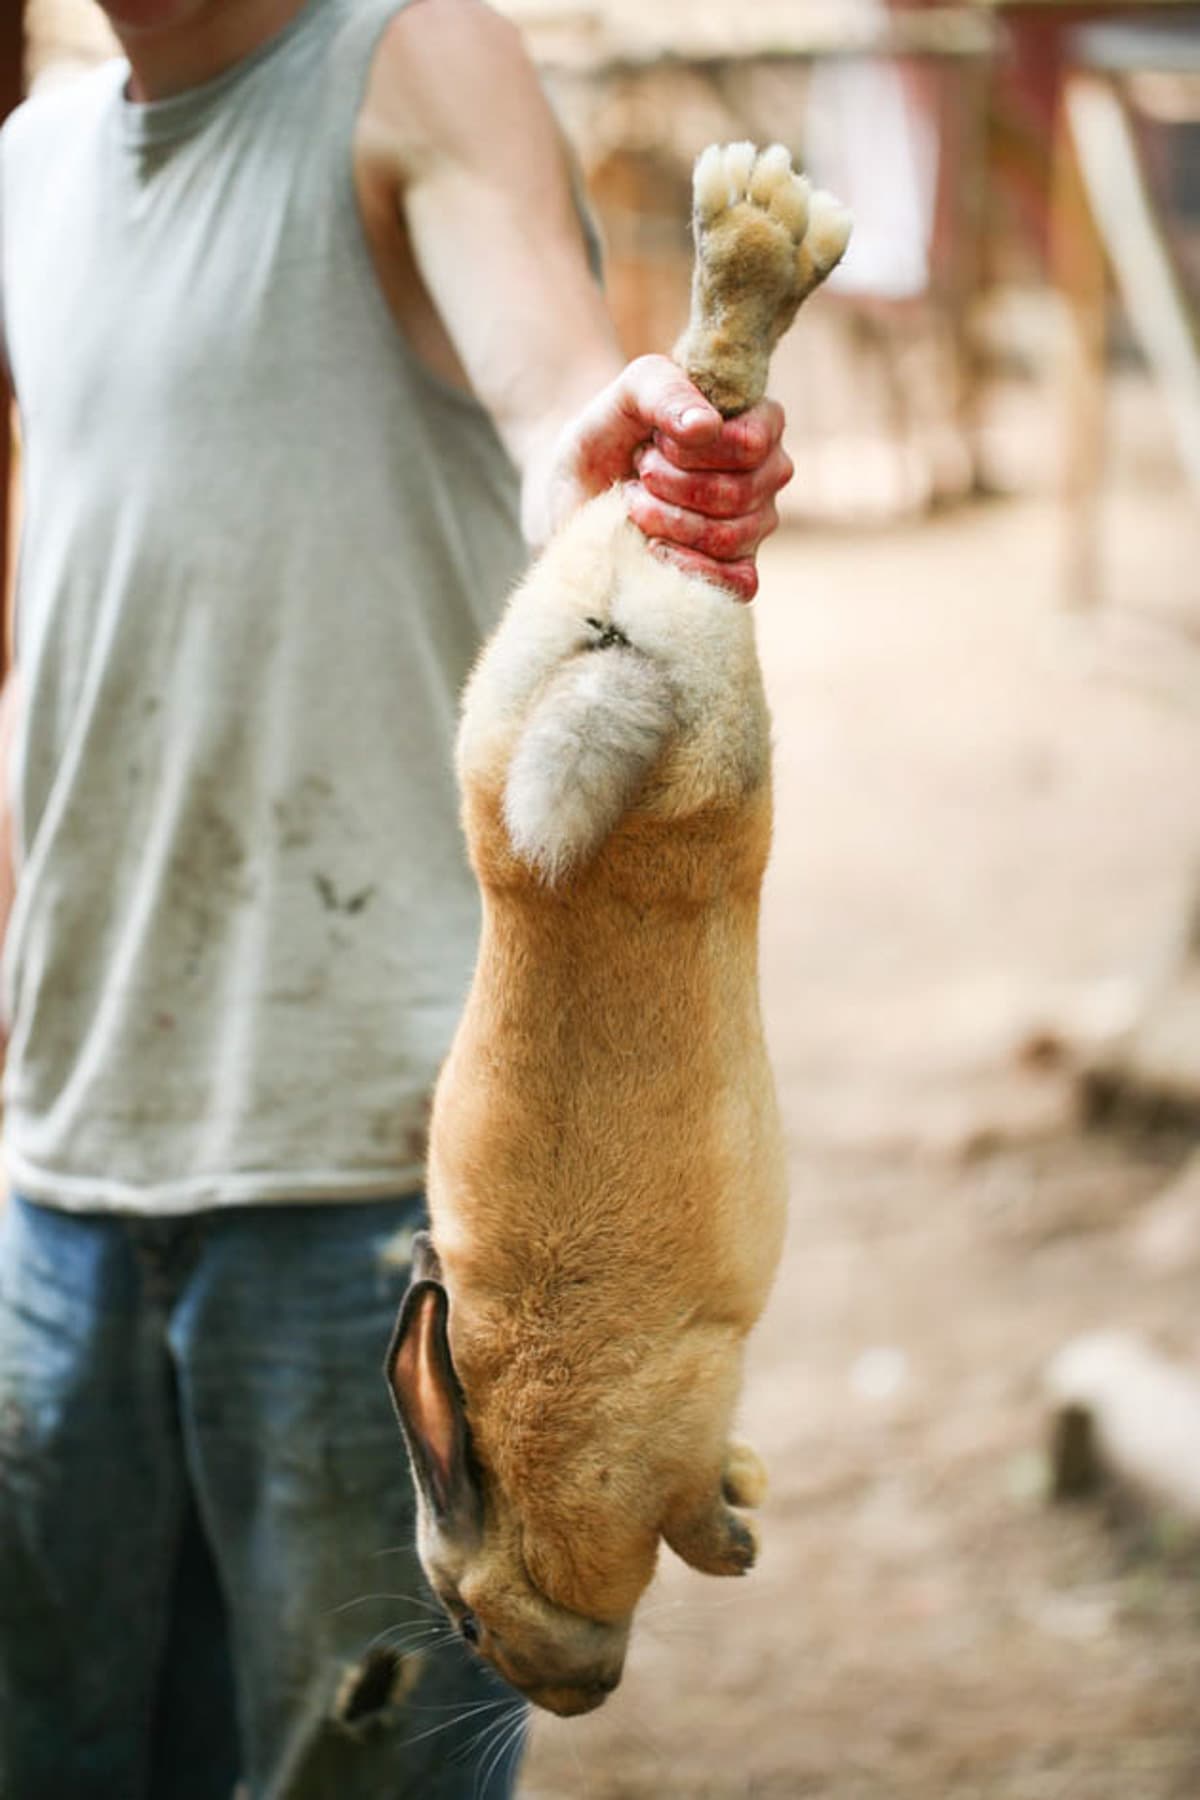 holding the rabbit by its hind legs